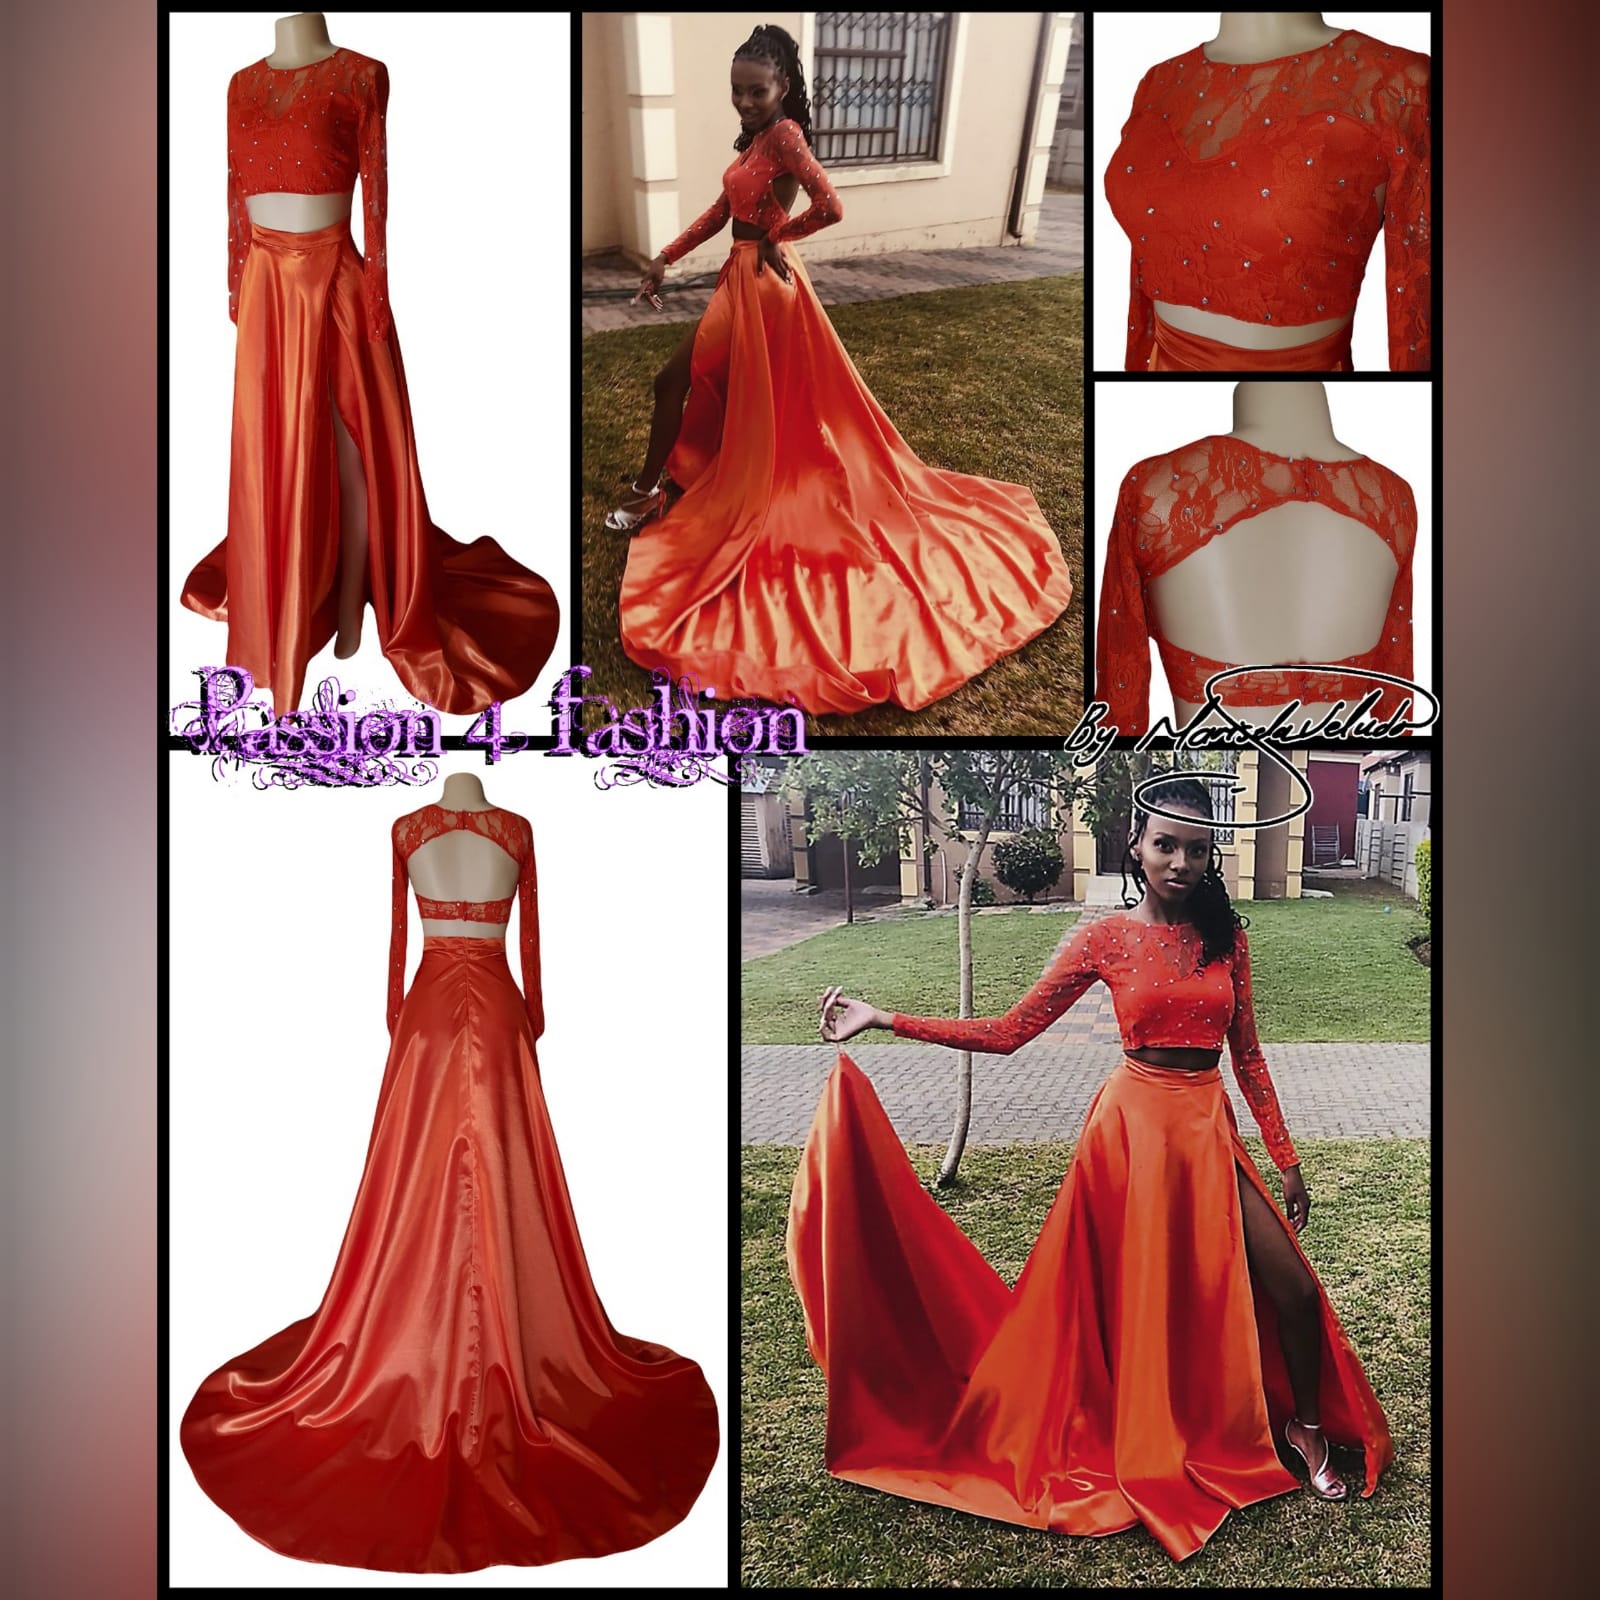 2 piece orange prom dress with a lace crop top 2 2 piece orange prom dress with a lace crop top detailed with silver beads. Flowy, shiny skirt with crossed slit and long train.